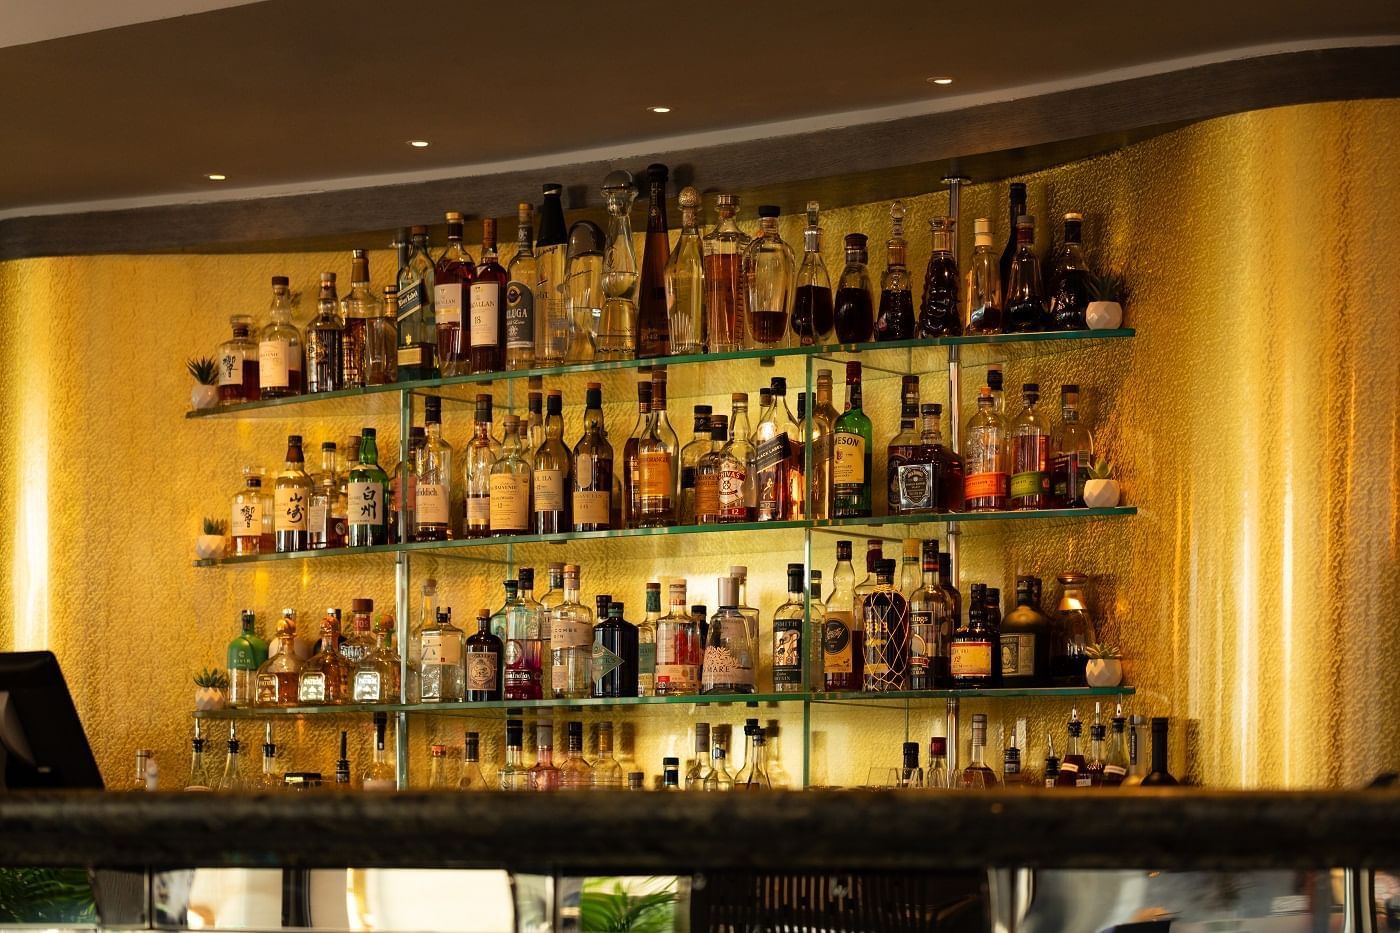 The back bar rack filled with liquor bottles in May Fair Bar at The May Fair Hotel